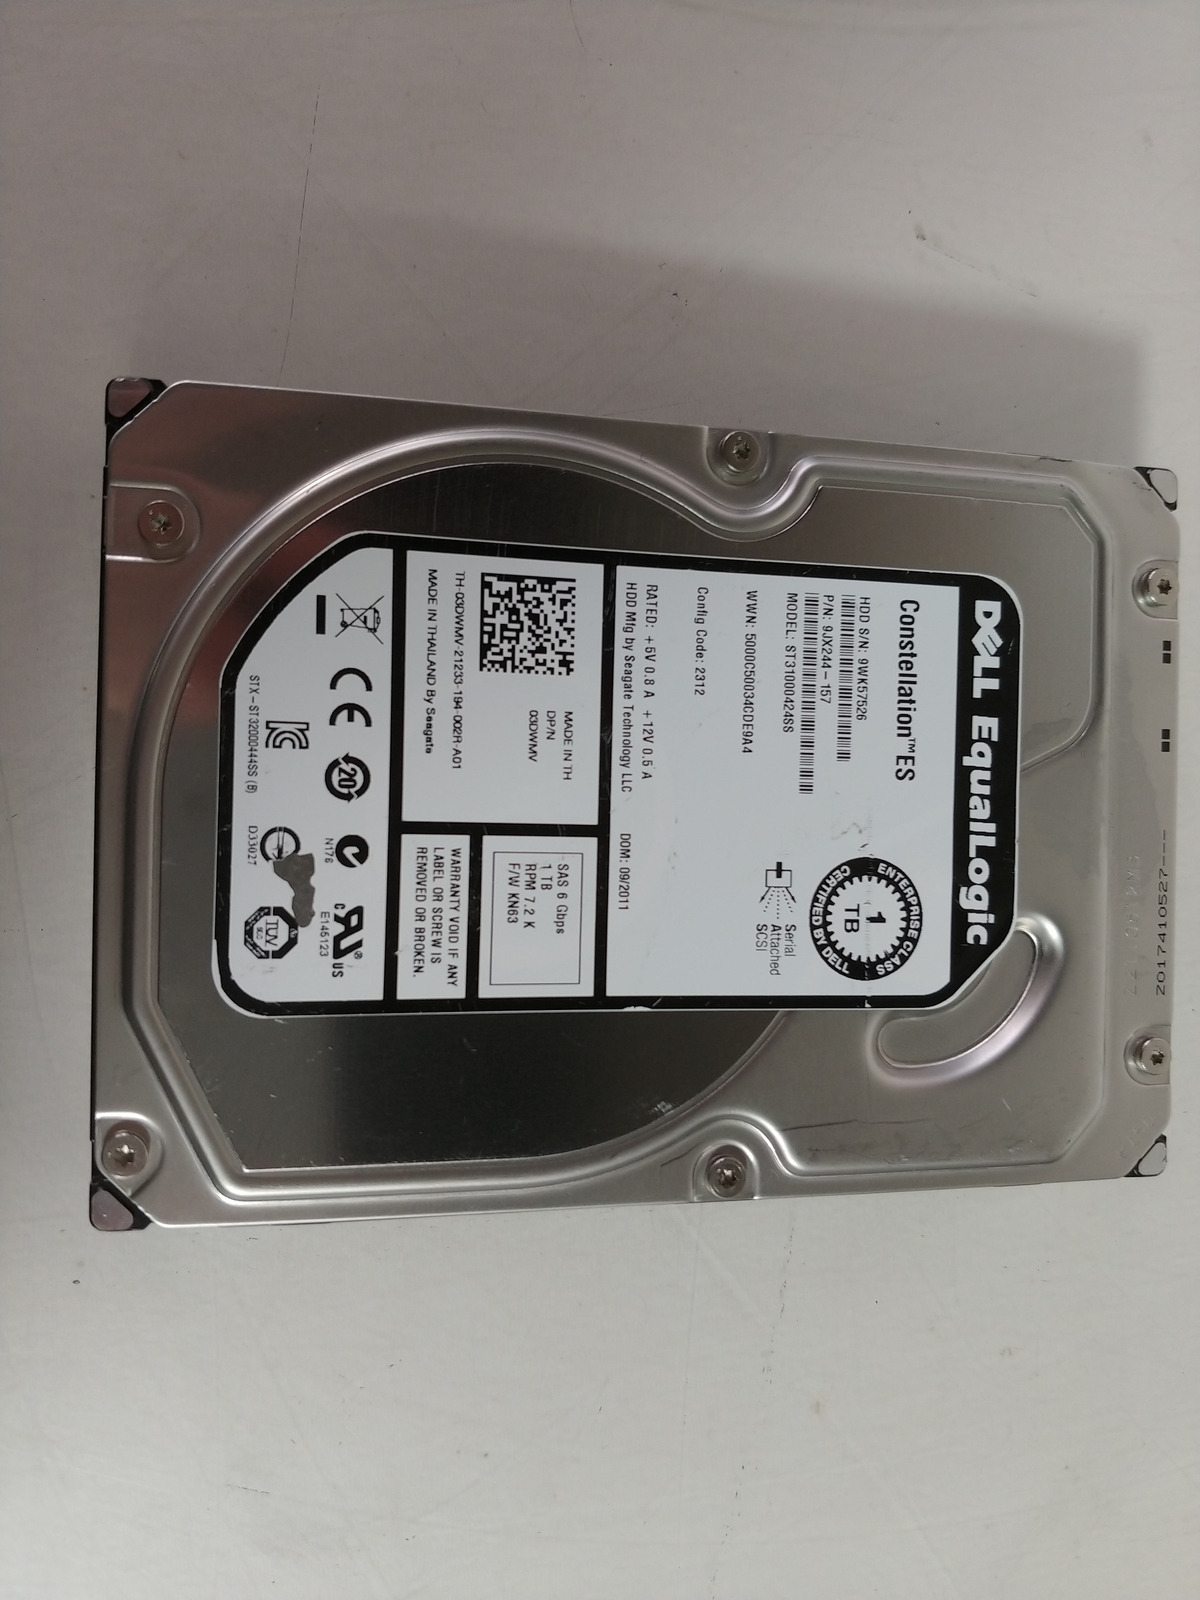 Lot of 2 Seagate Dell EqualLogic ST31000424SS 1 TB 7.2K SAS 2 3.5 in Hard Drive